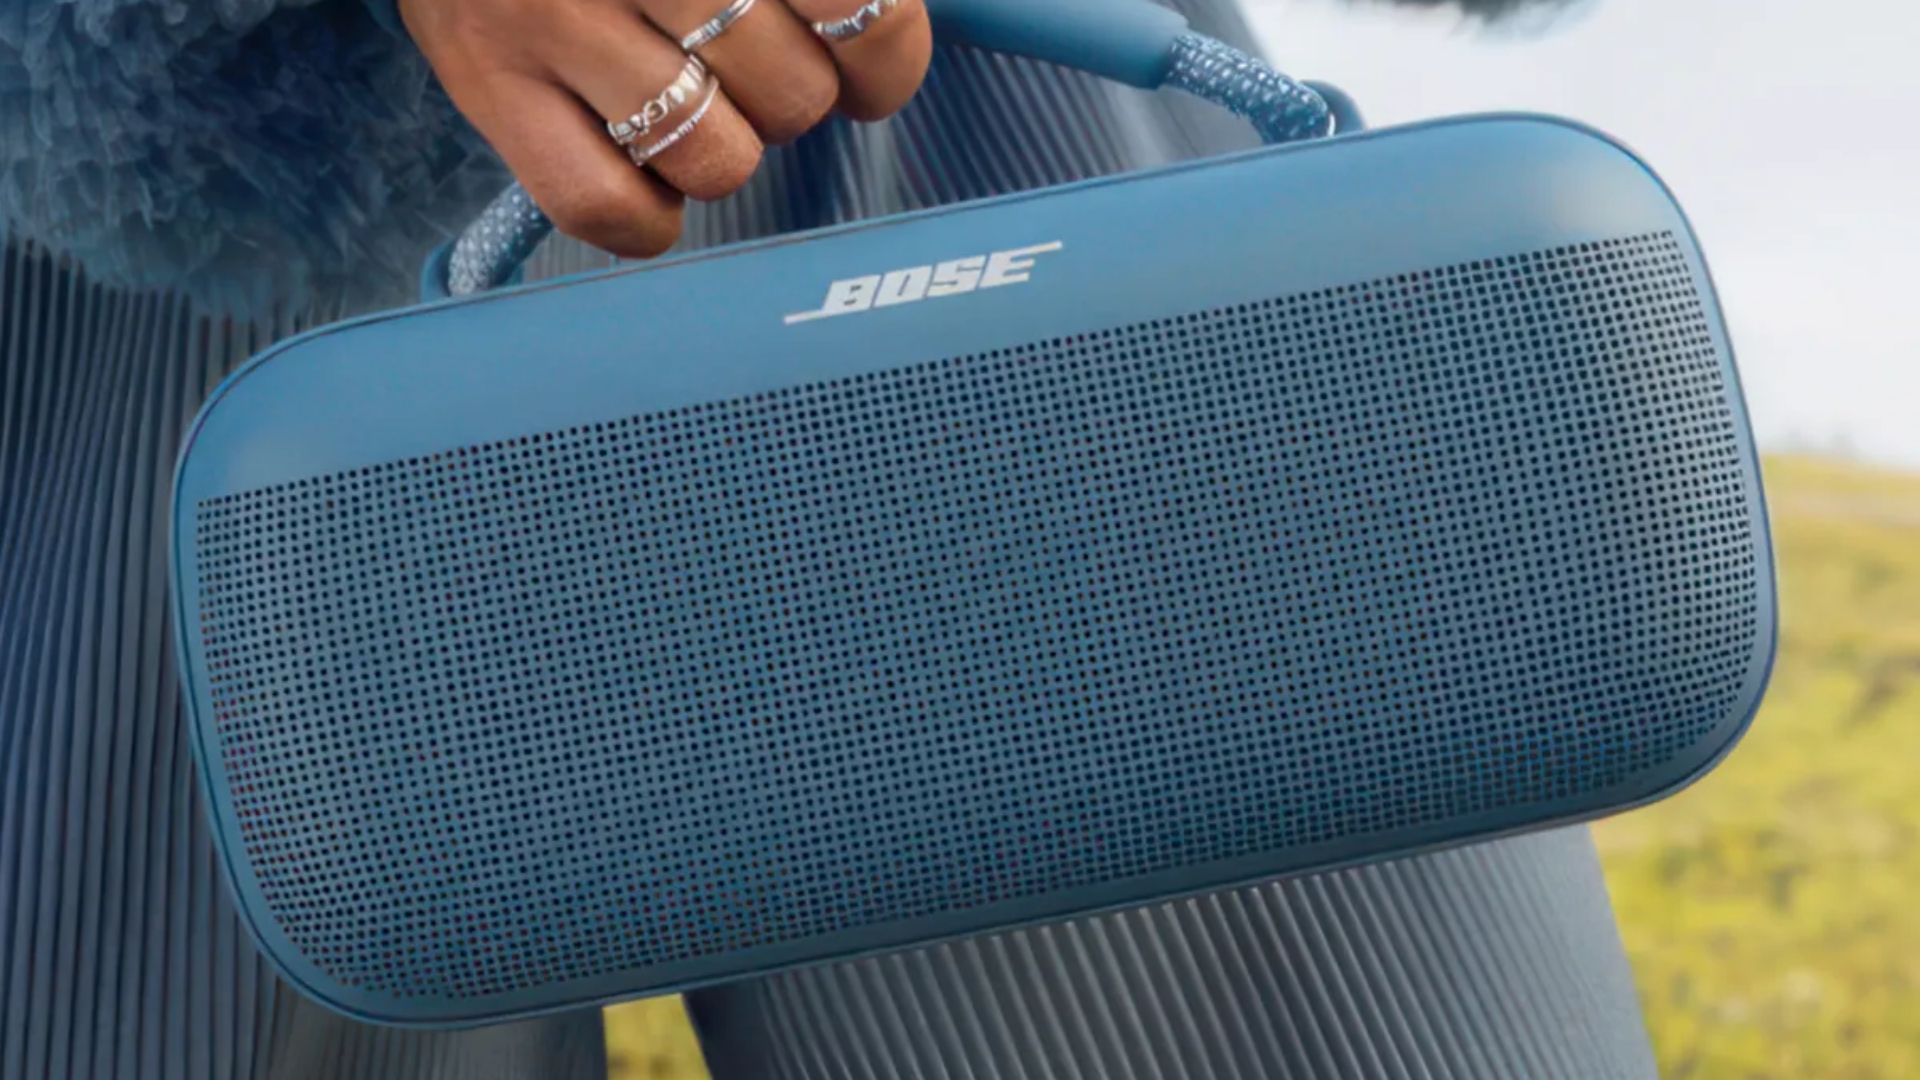 The Bose SoundLink Max is a lightweight speaker that also functions as a battery bank.